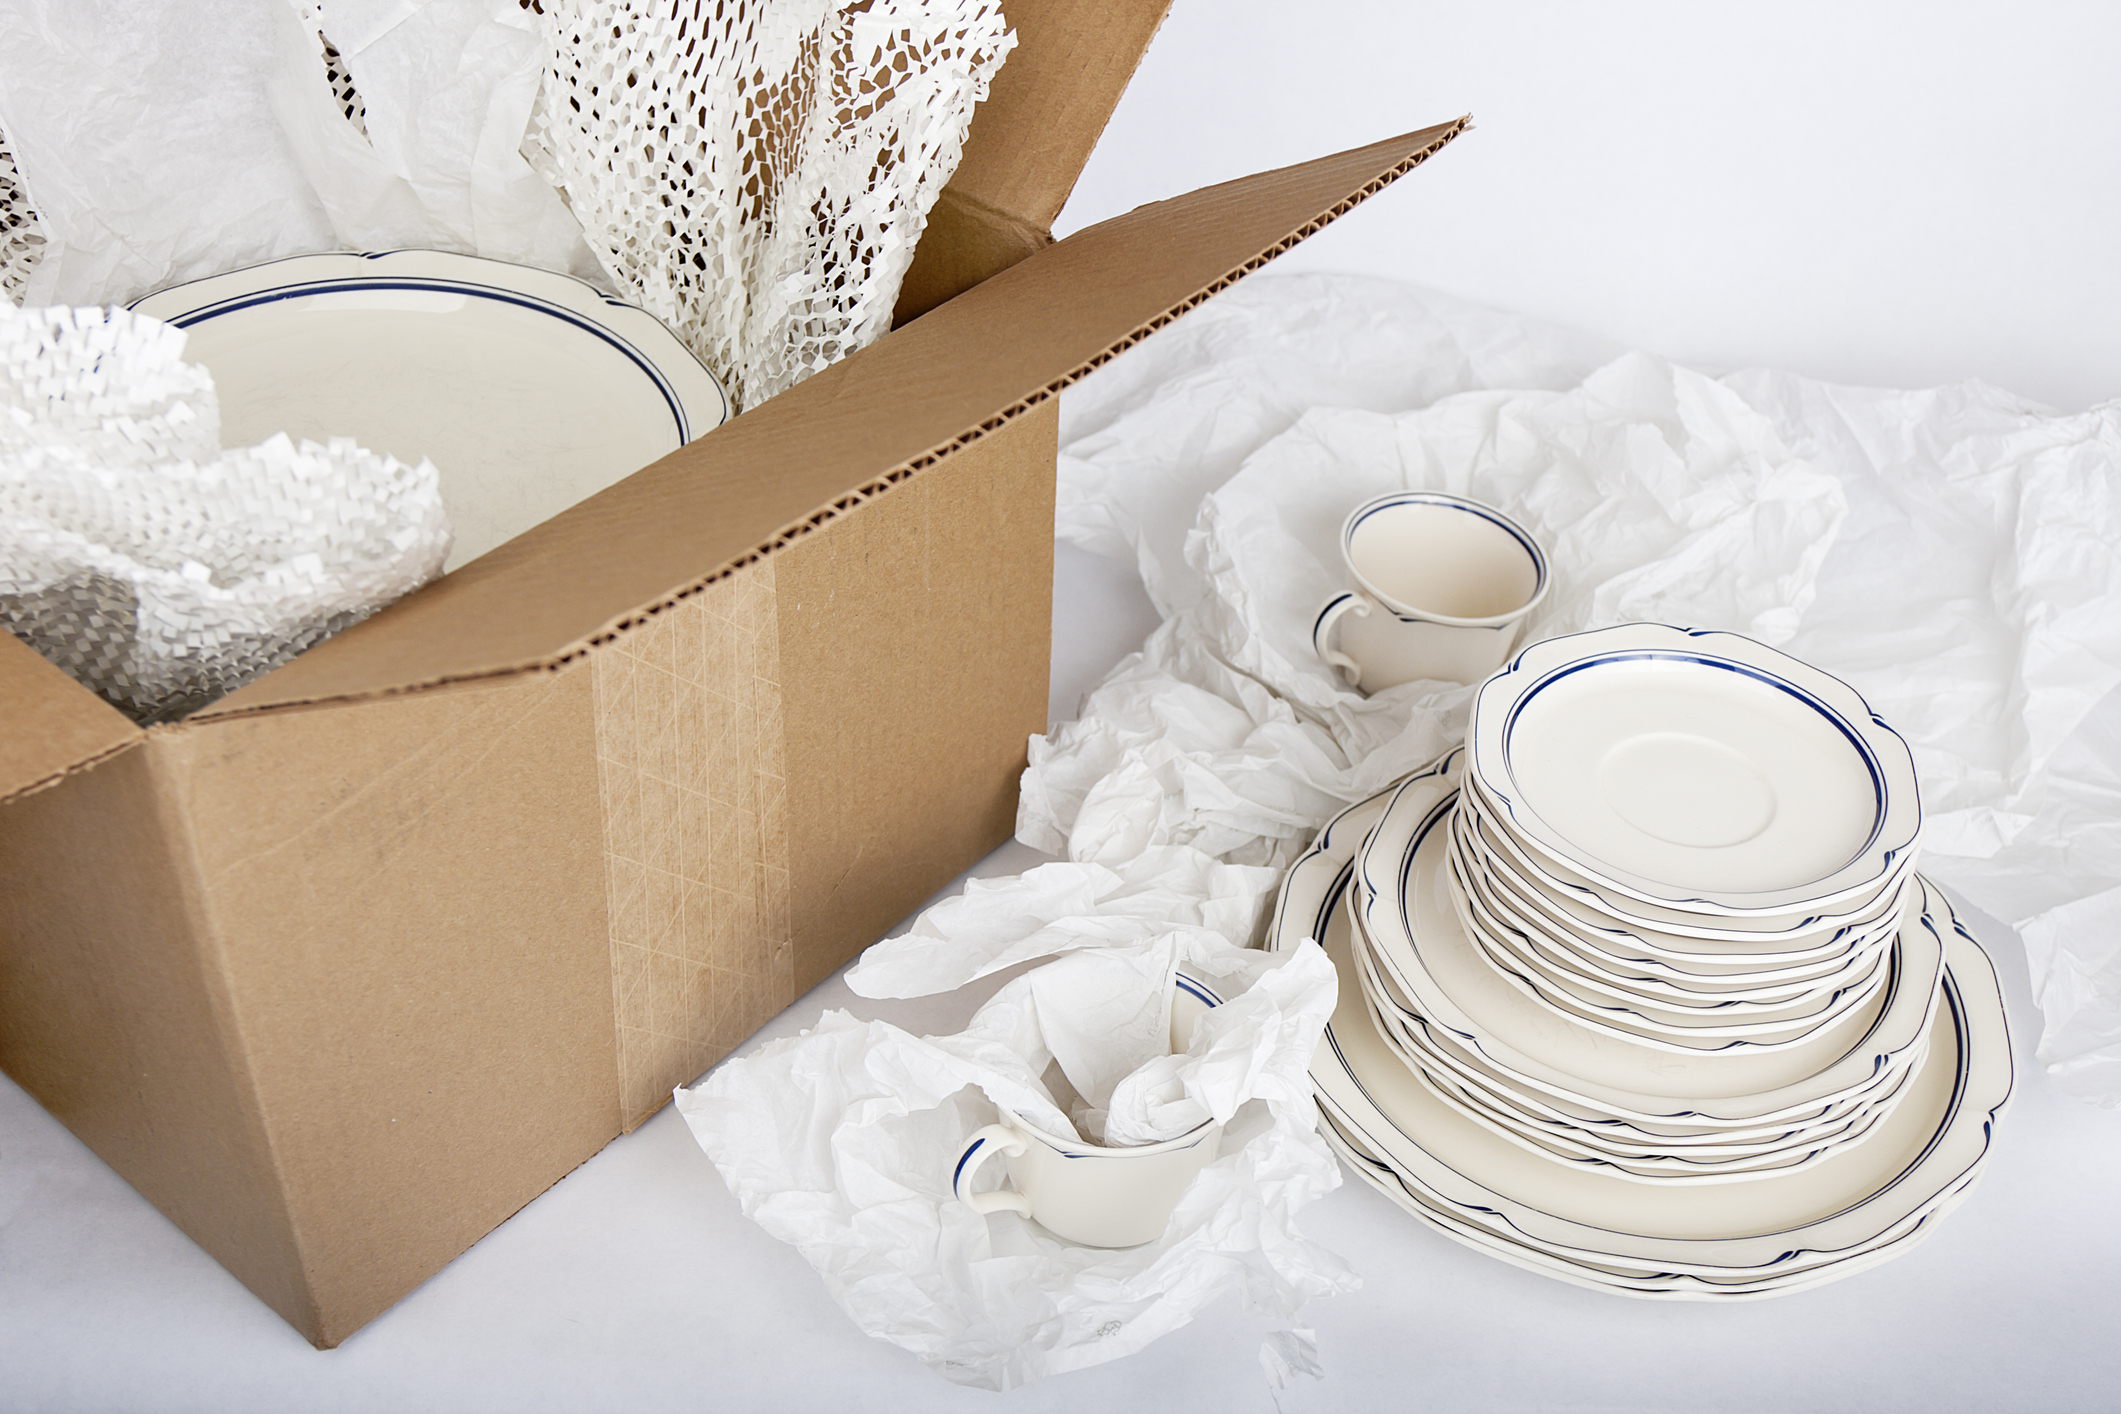 dishes being wrapped in tissue paper and packed in a cardboard box to show how to pack china for moving